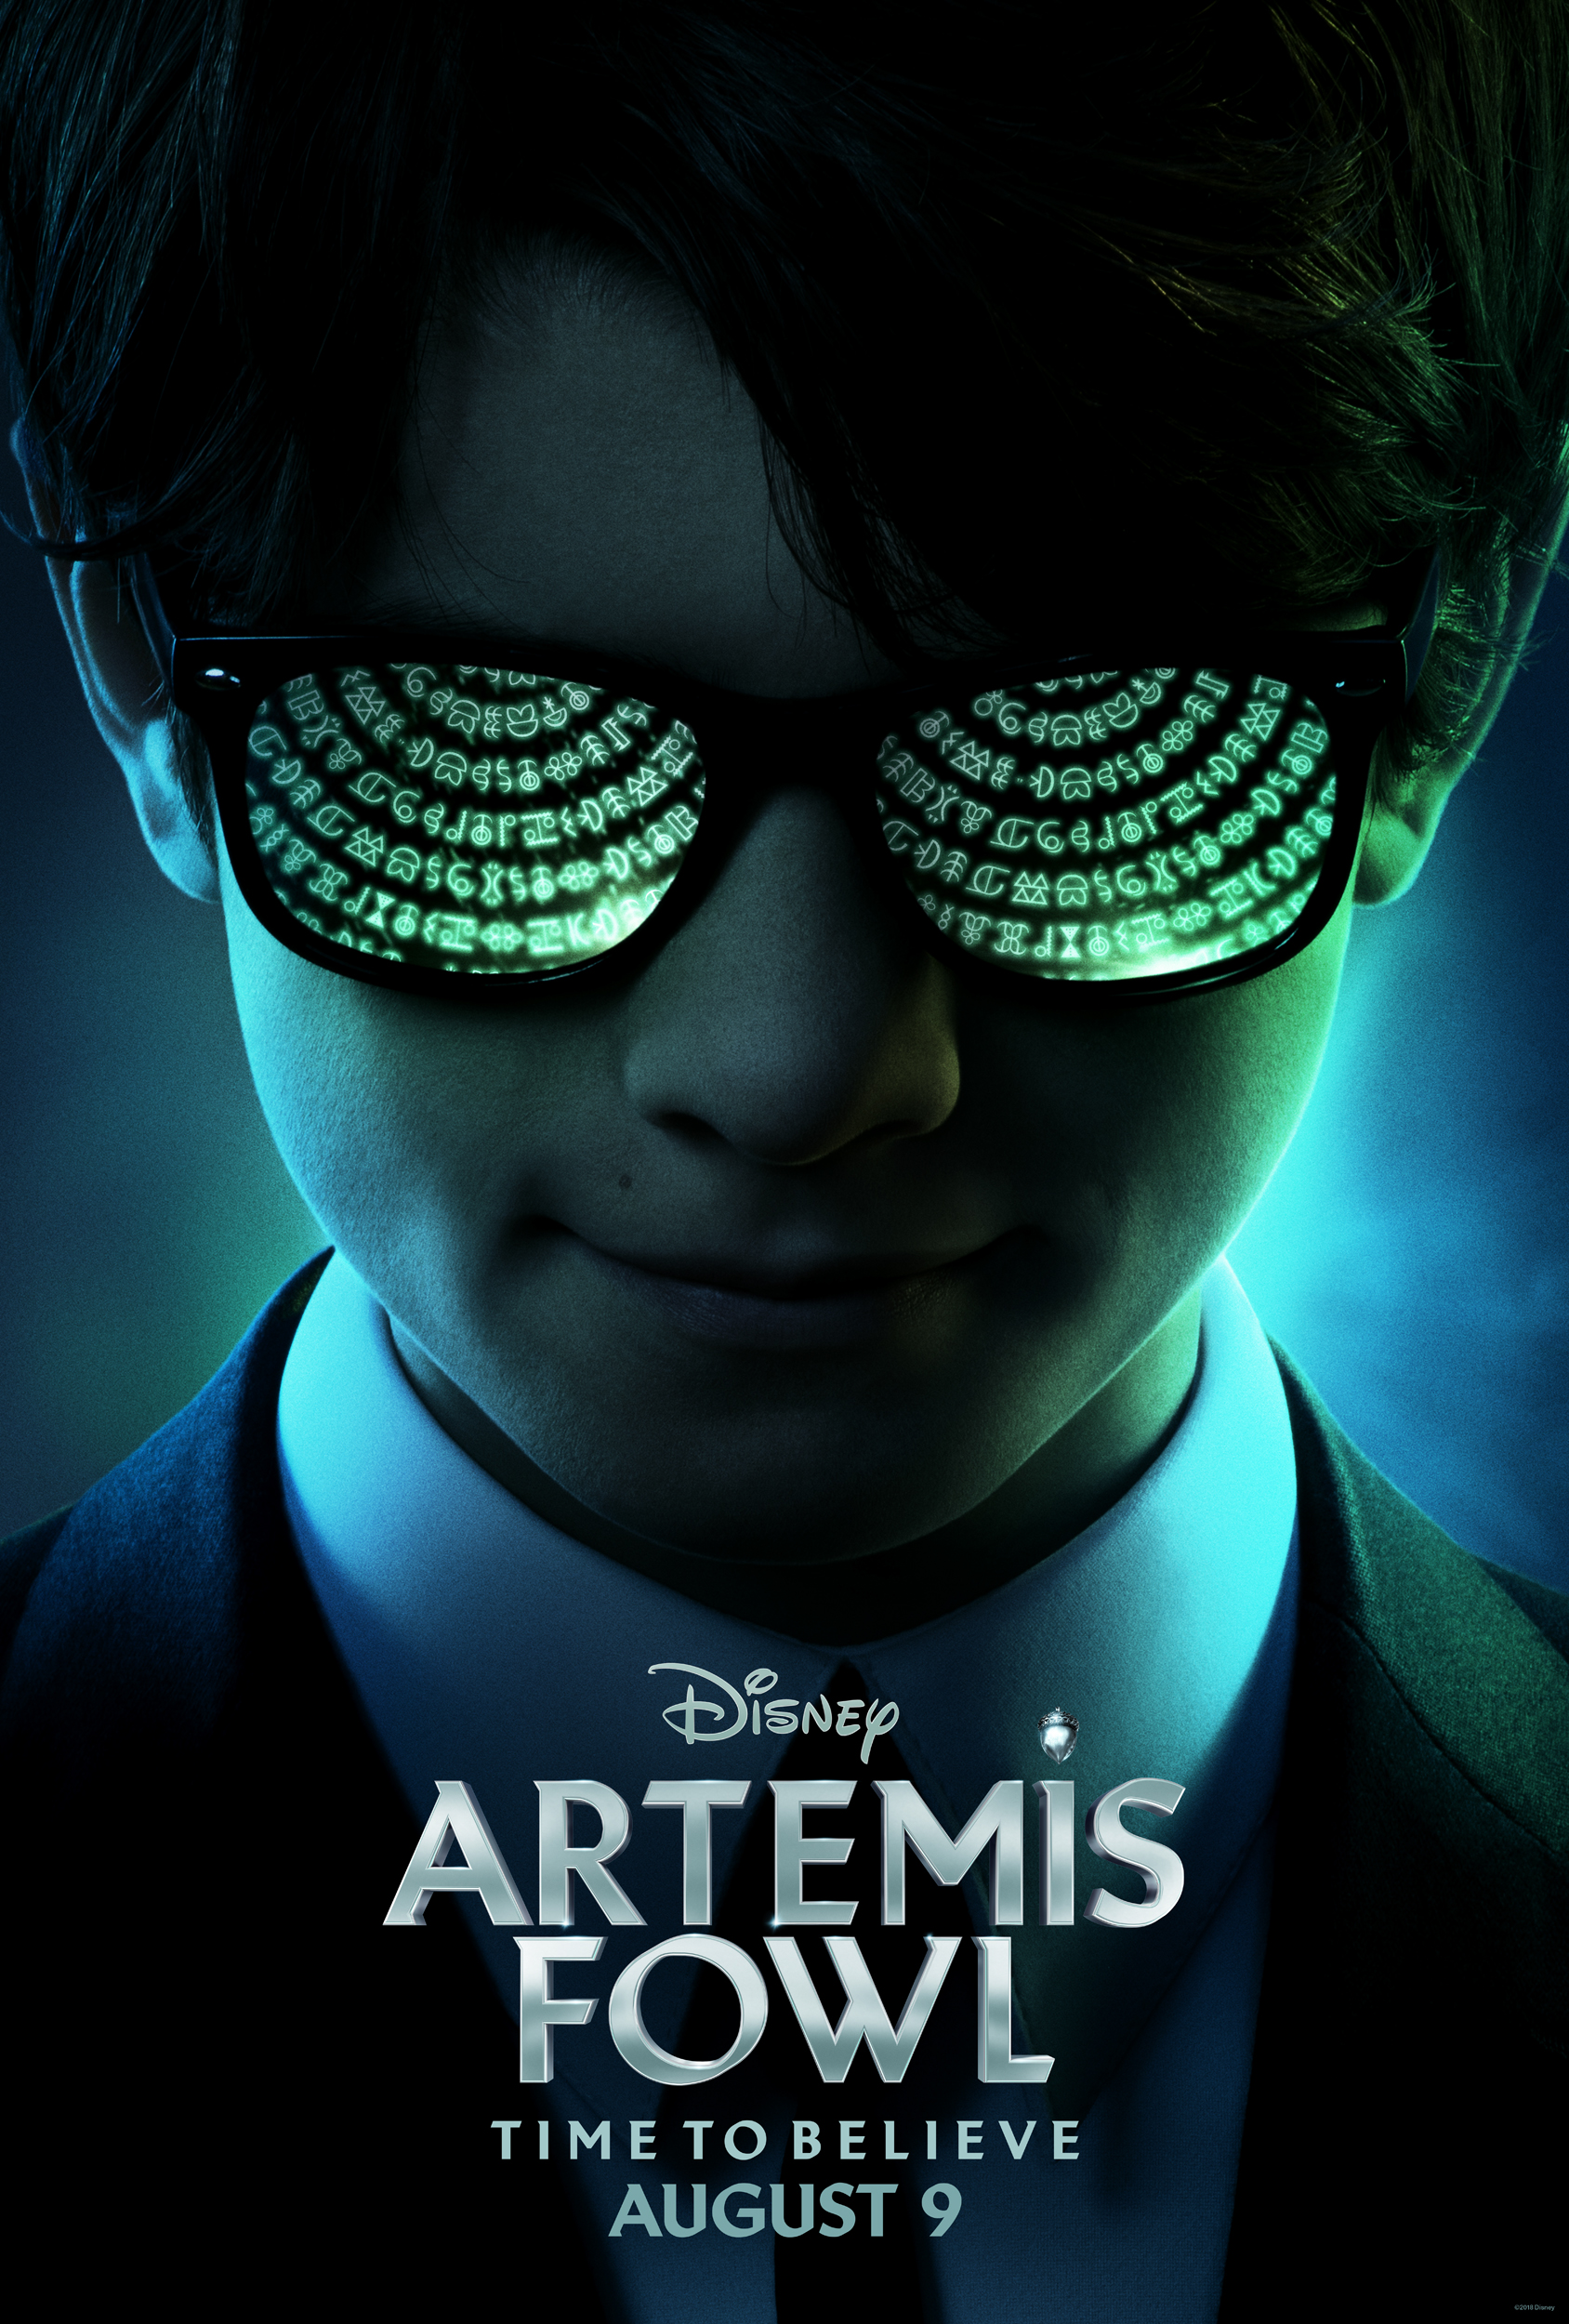 Get Your Very Own Look at Disney’s “Artemis Fowl” with New Teaser